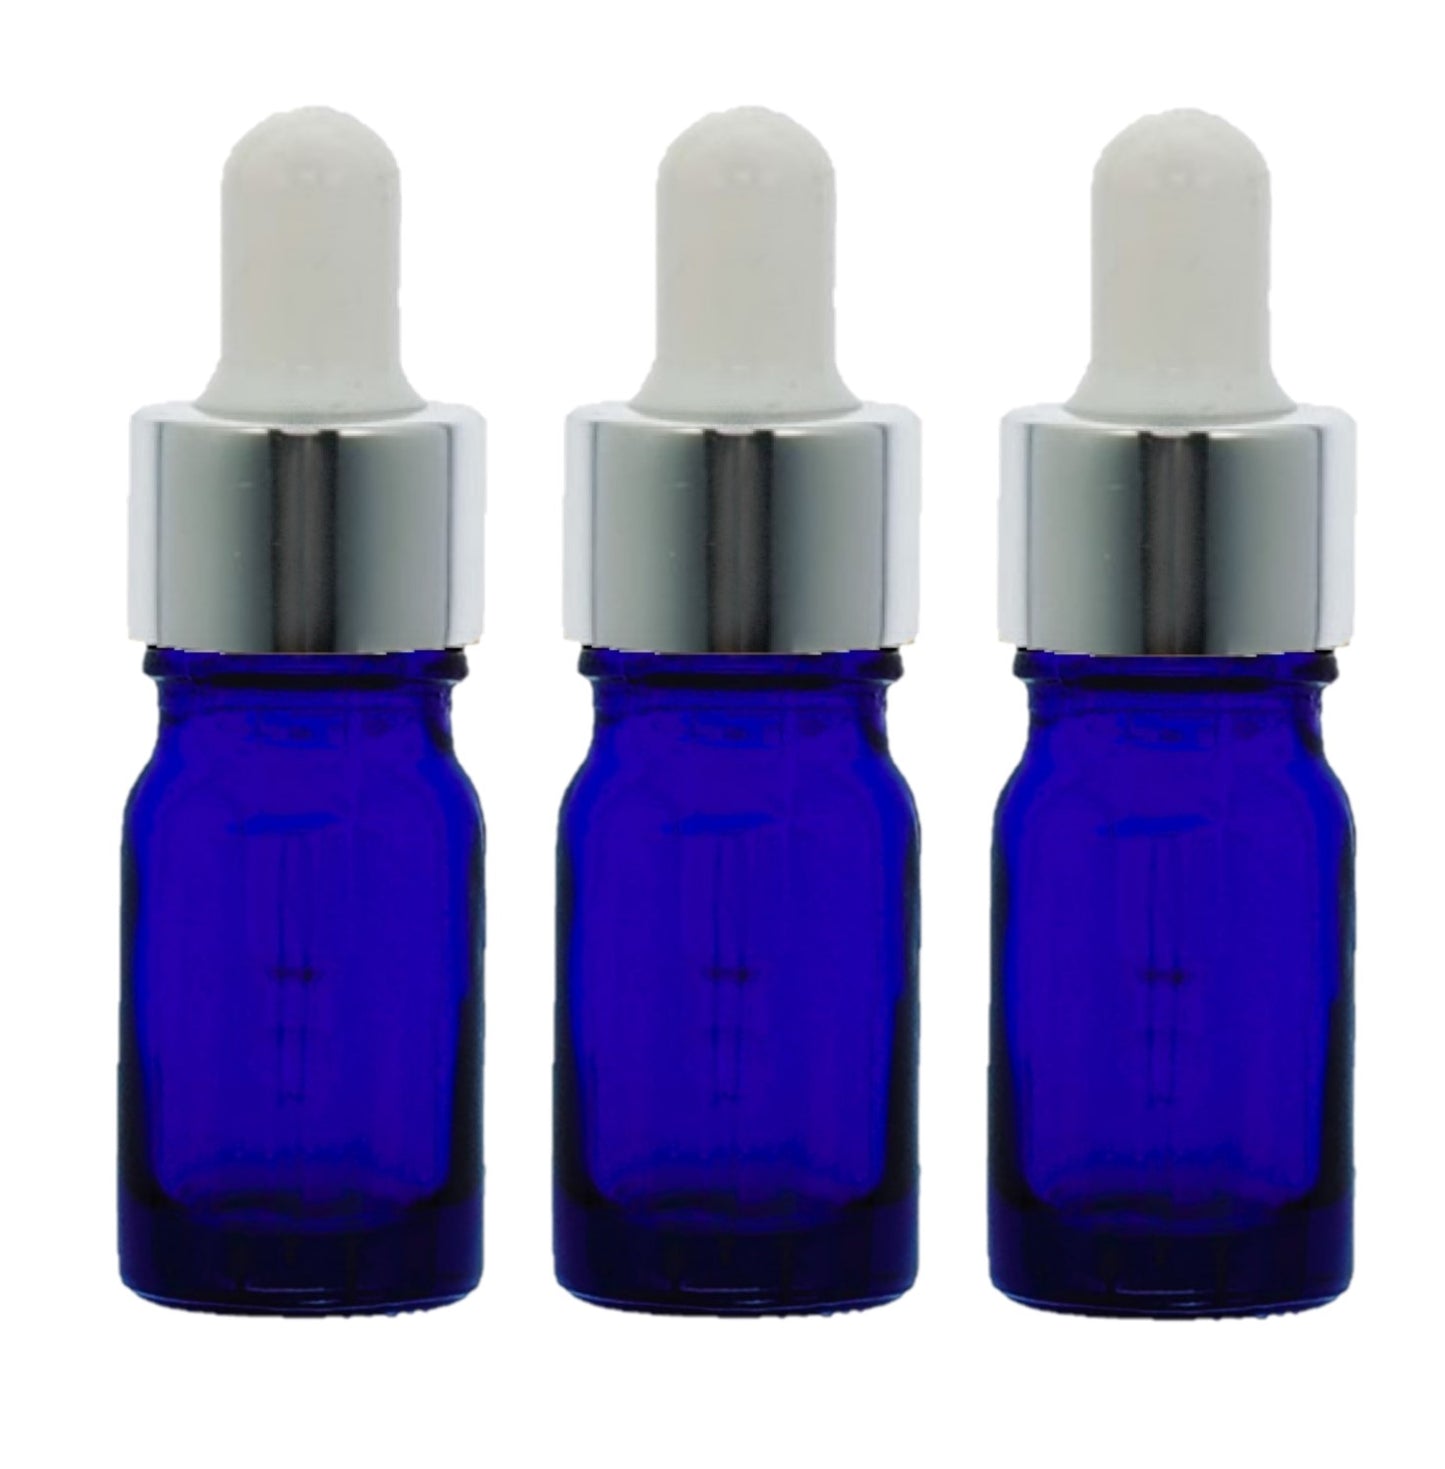 5ml Blue Glass Bottles with Silver/White Glass Pipettes